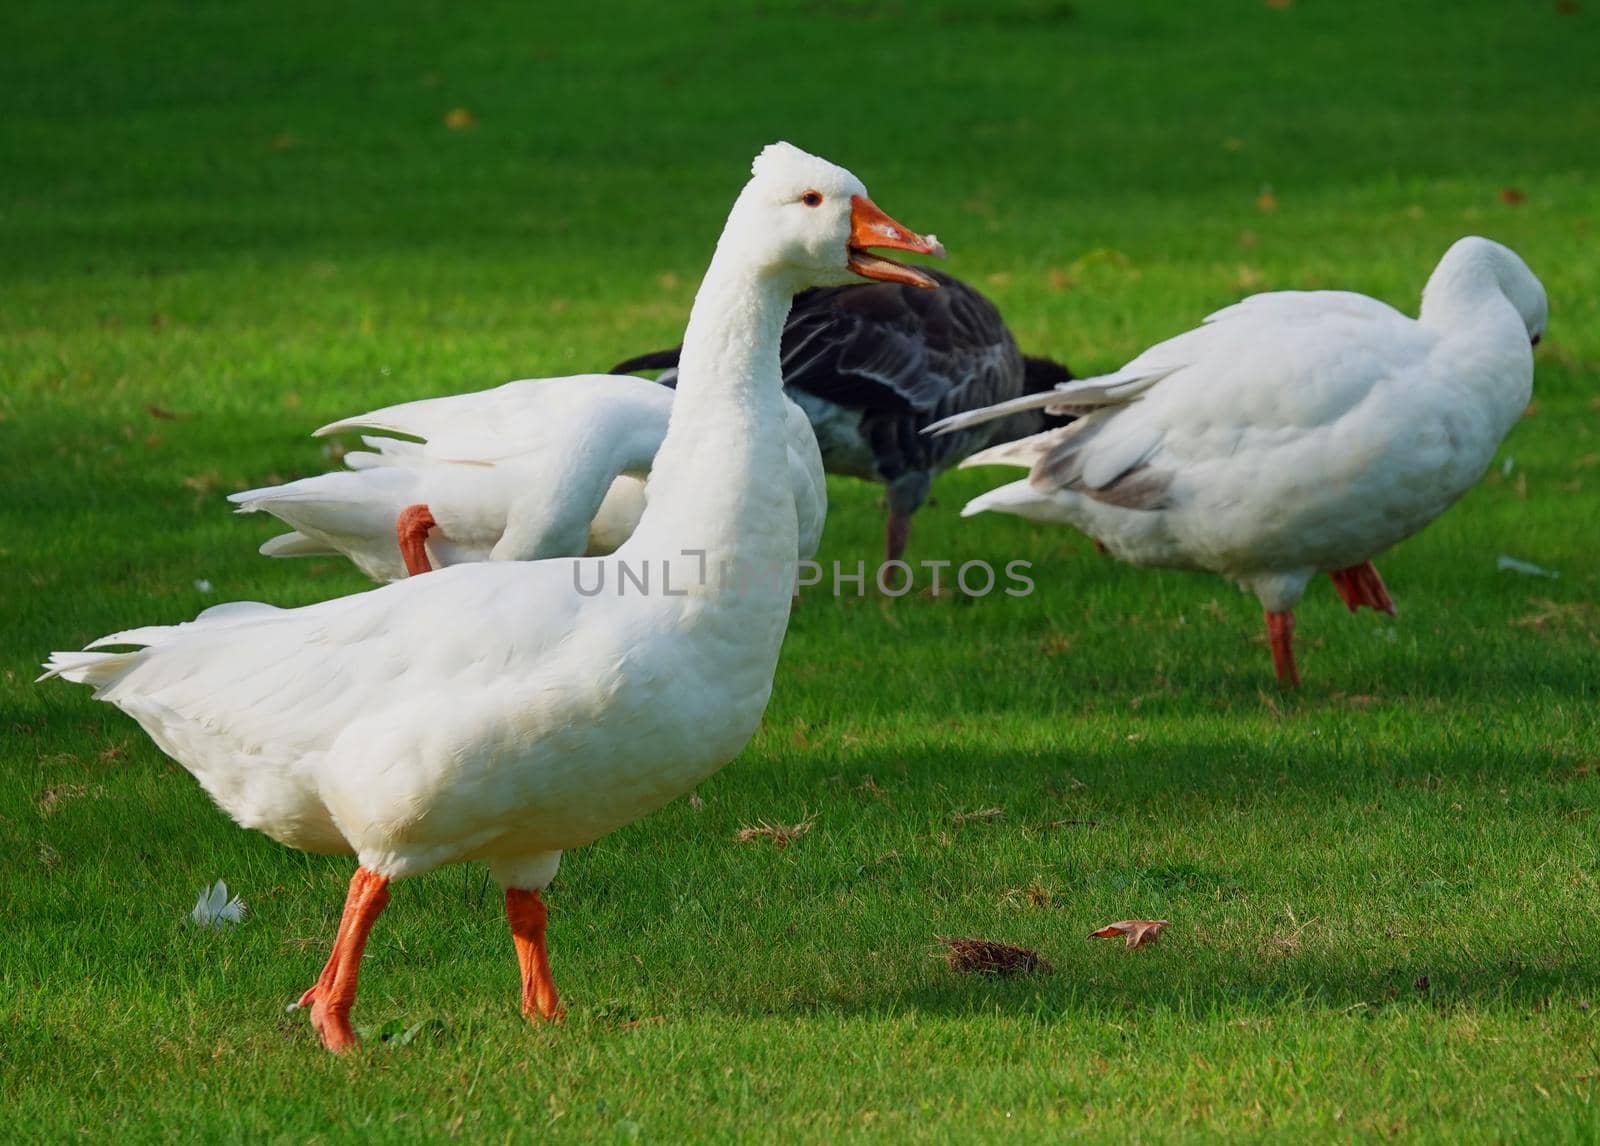 Complaining white domestic goose on a meadow in front of three other geese. Location: Hardenberg, the Netherlands